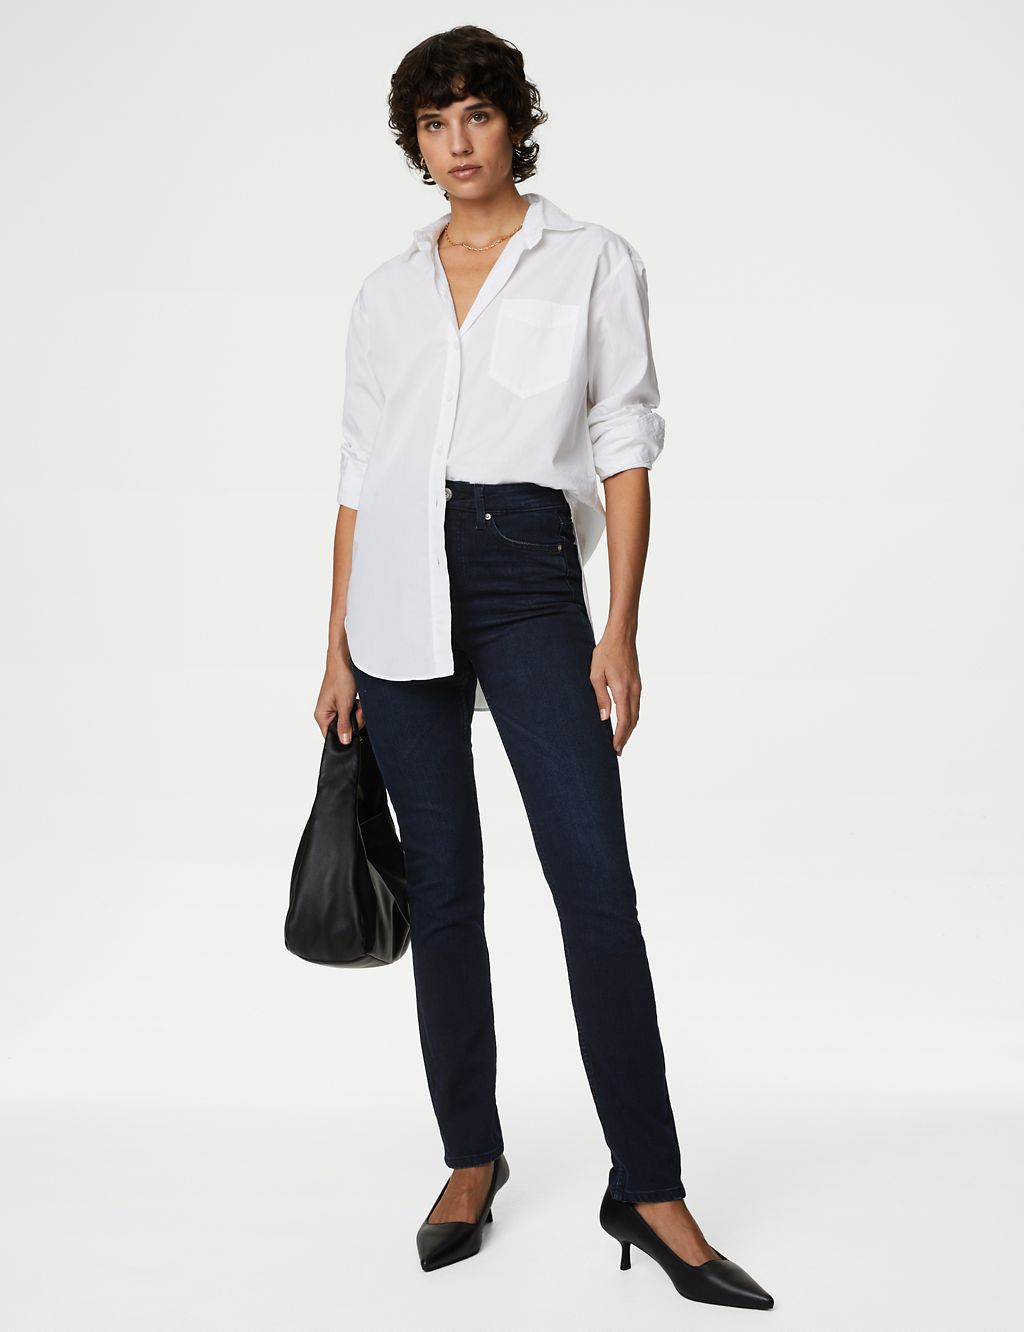 Lily Slim Fit Jeans with Stretch 2 of 5